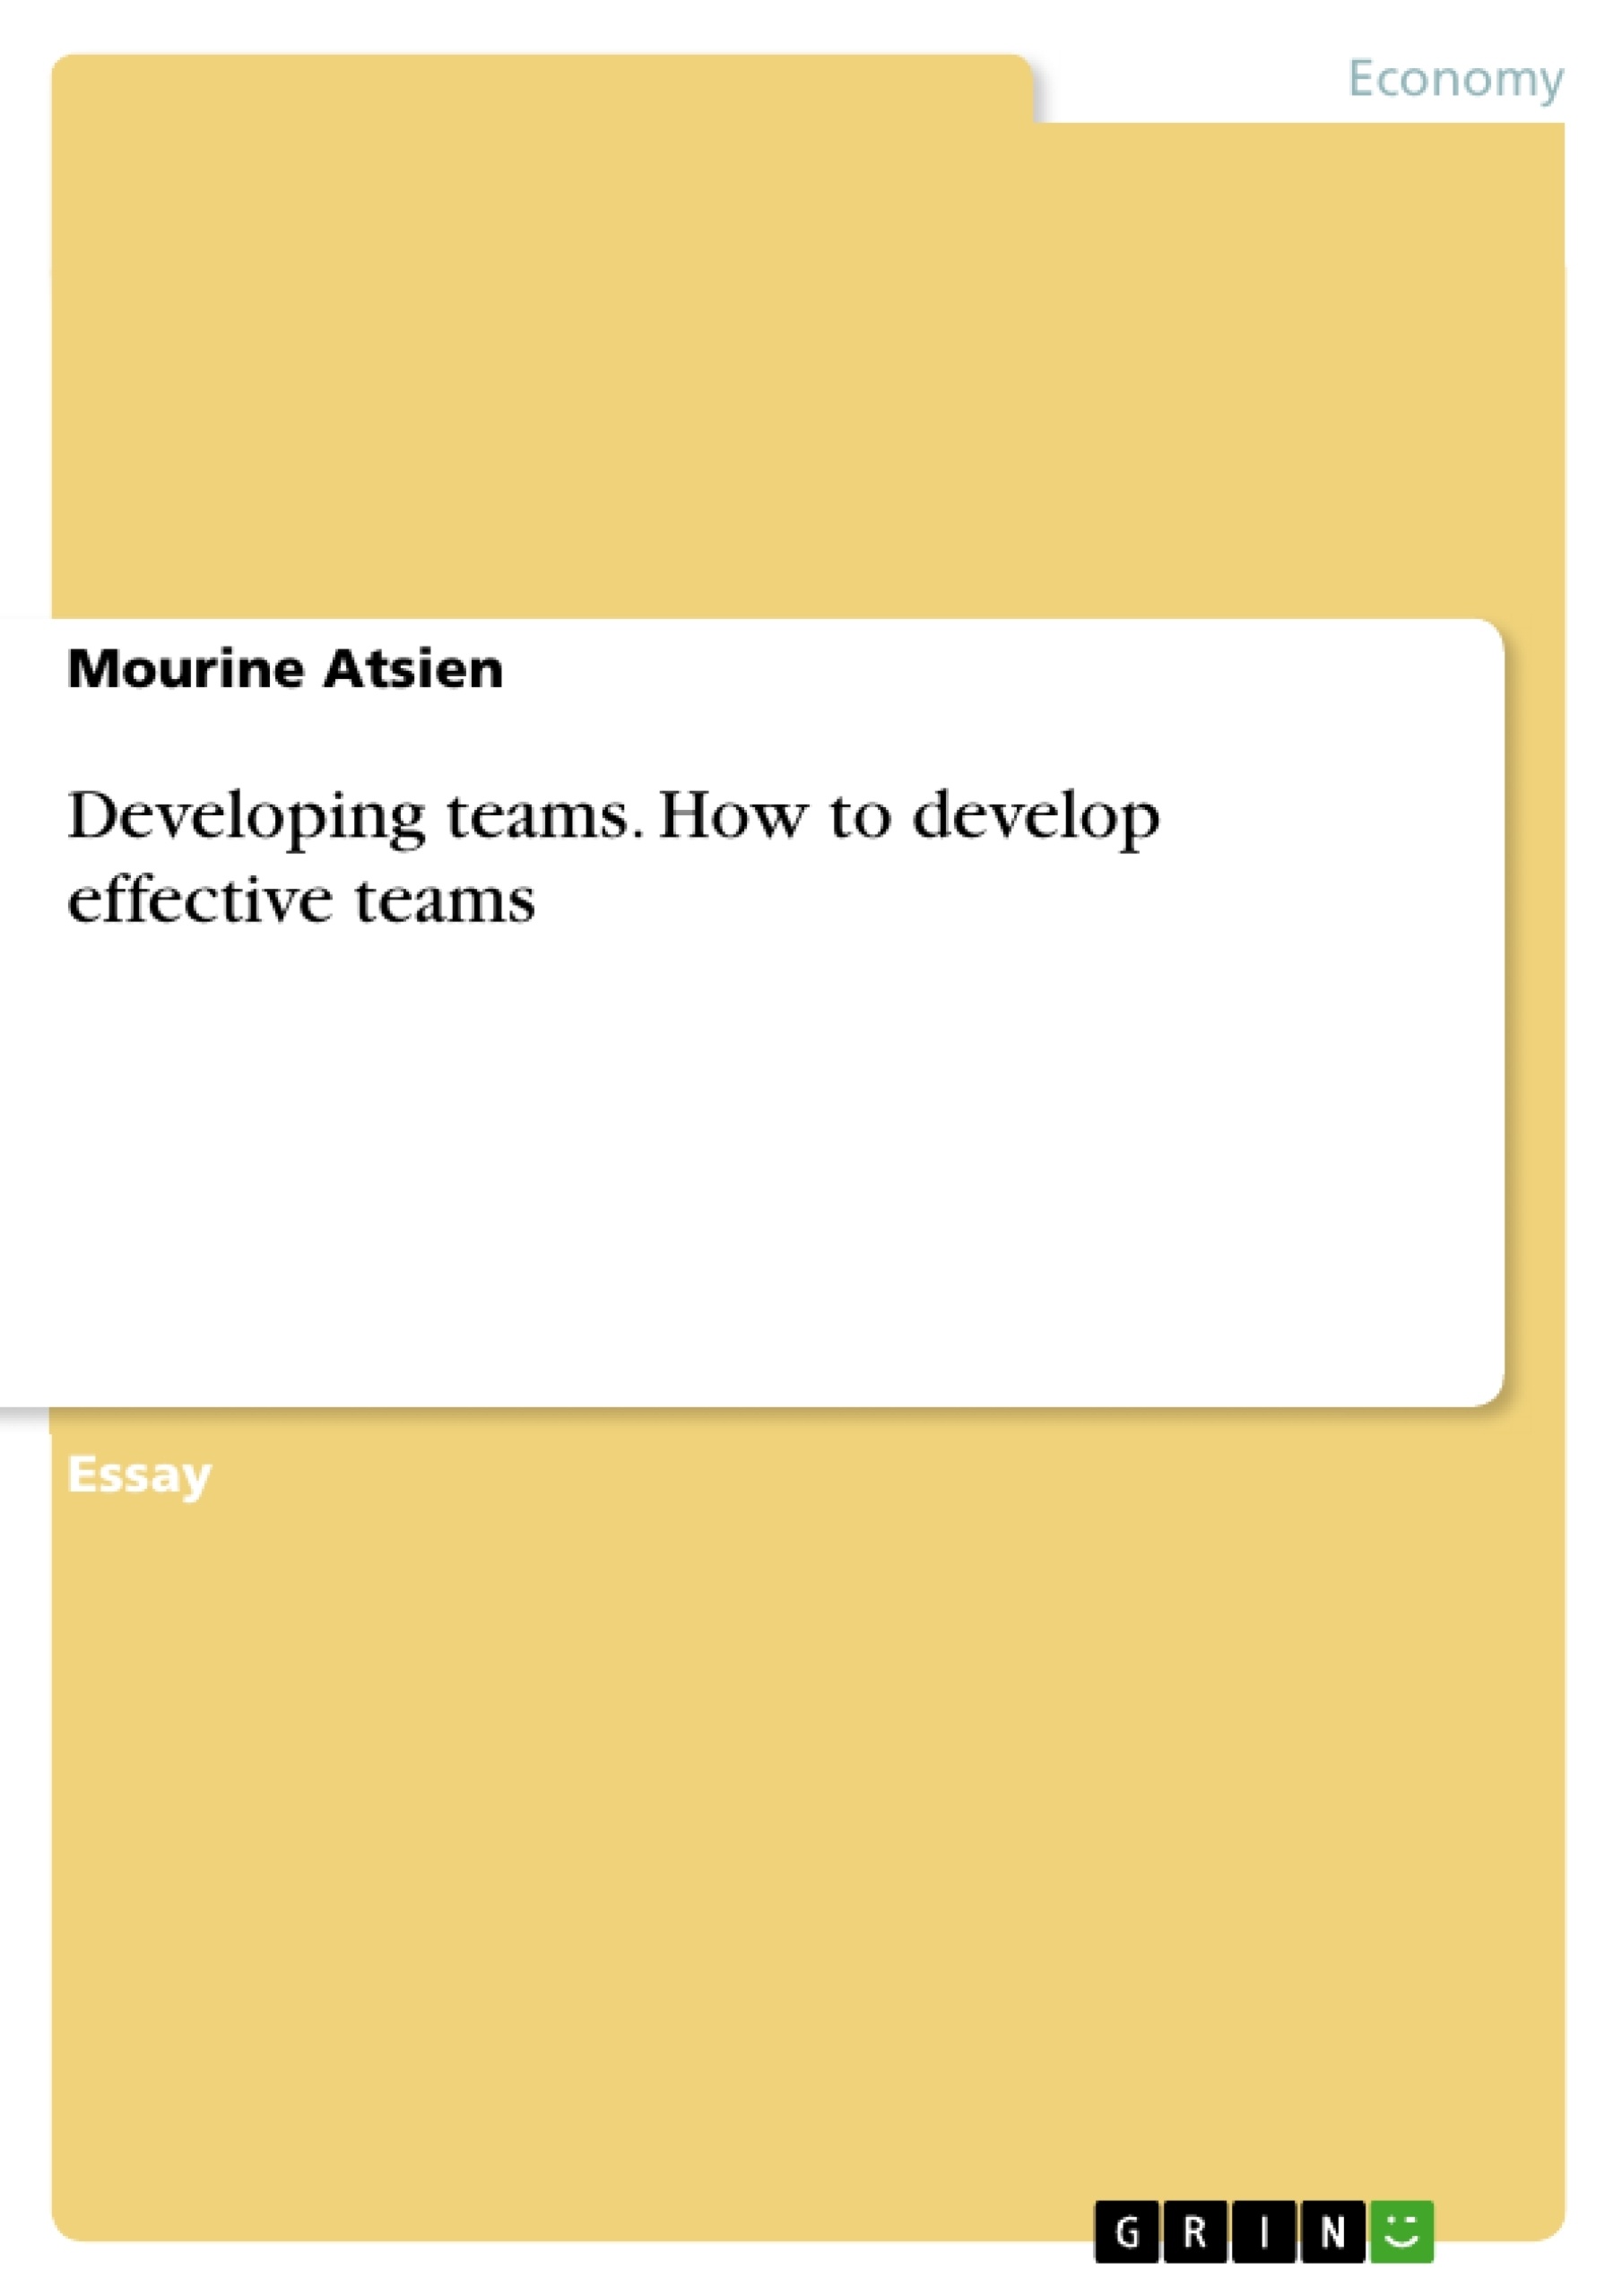 Title: Developing teams. How to develop effective teams